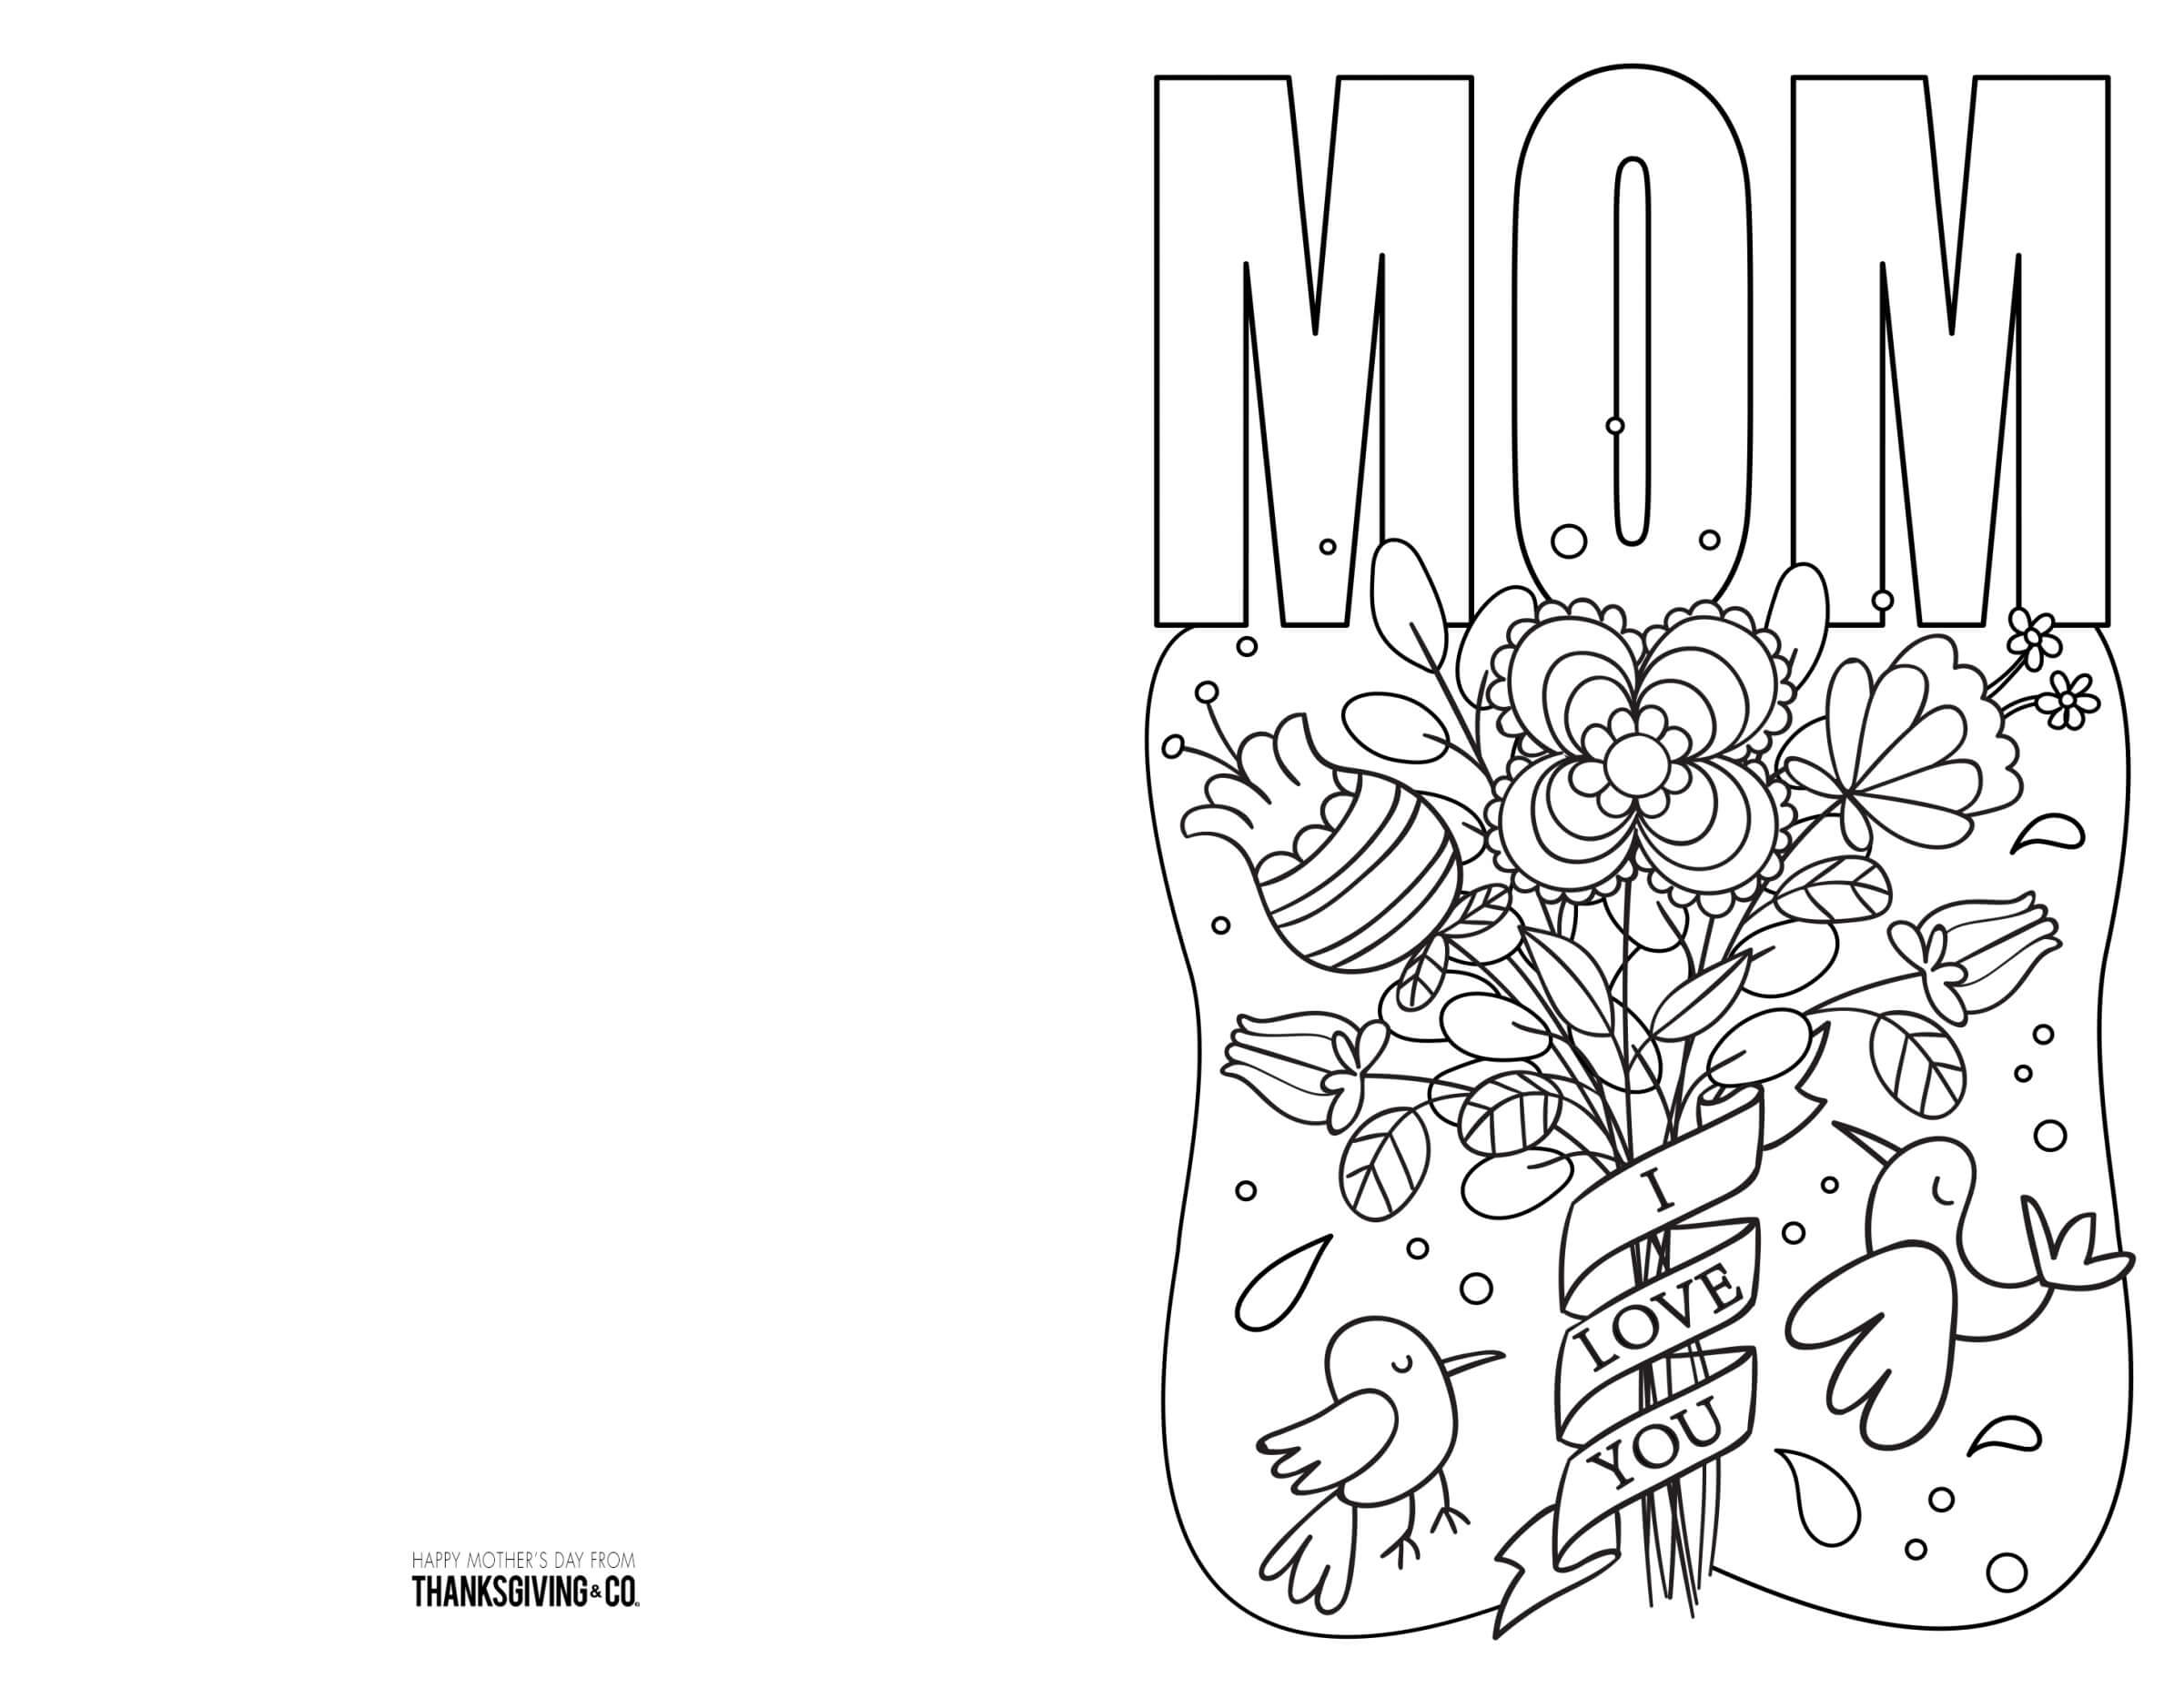 Coloring Pages : Free Printable Mothers Day Ecards To Color With Regard To Mothers Day Card Templates